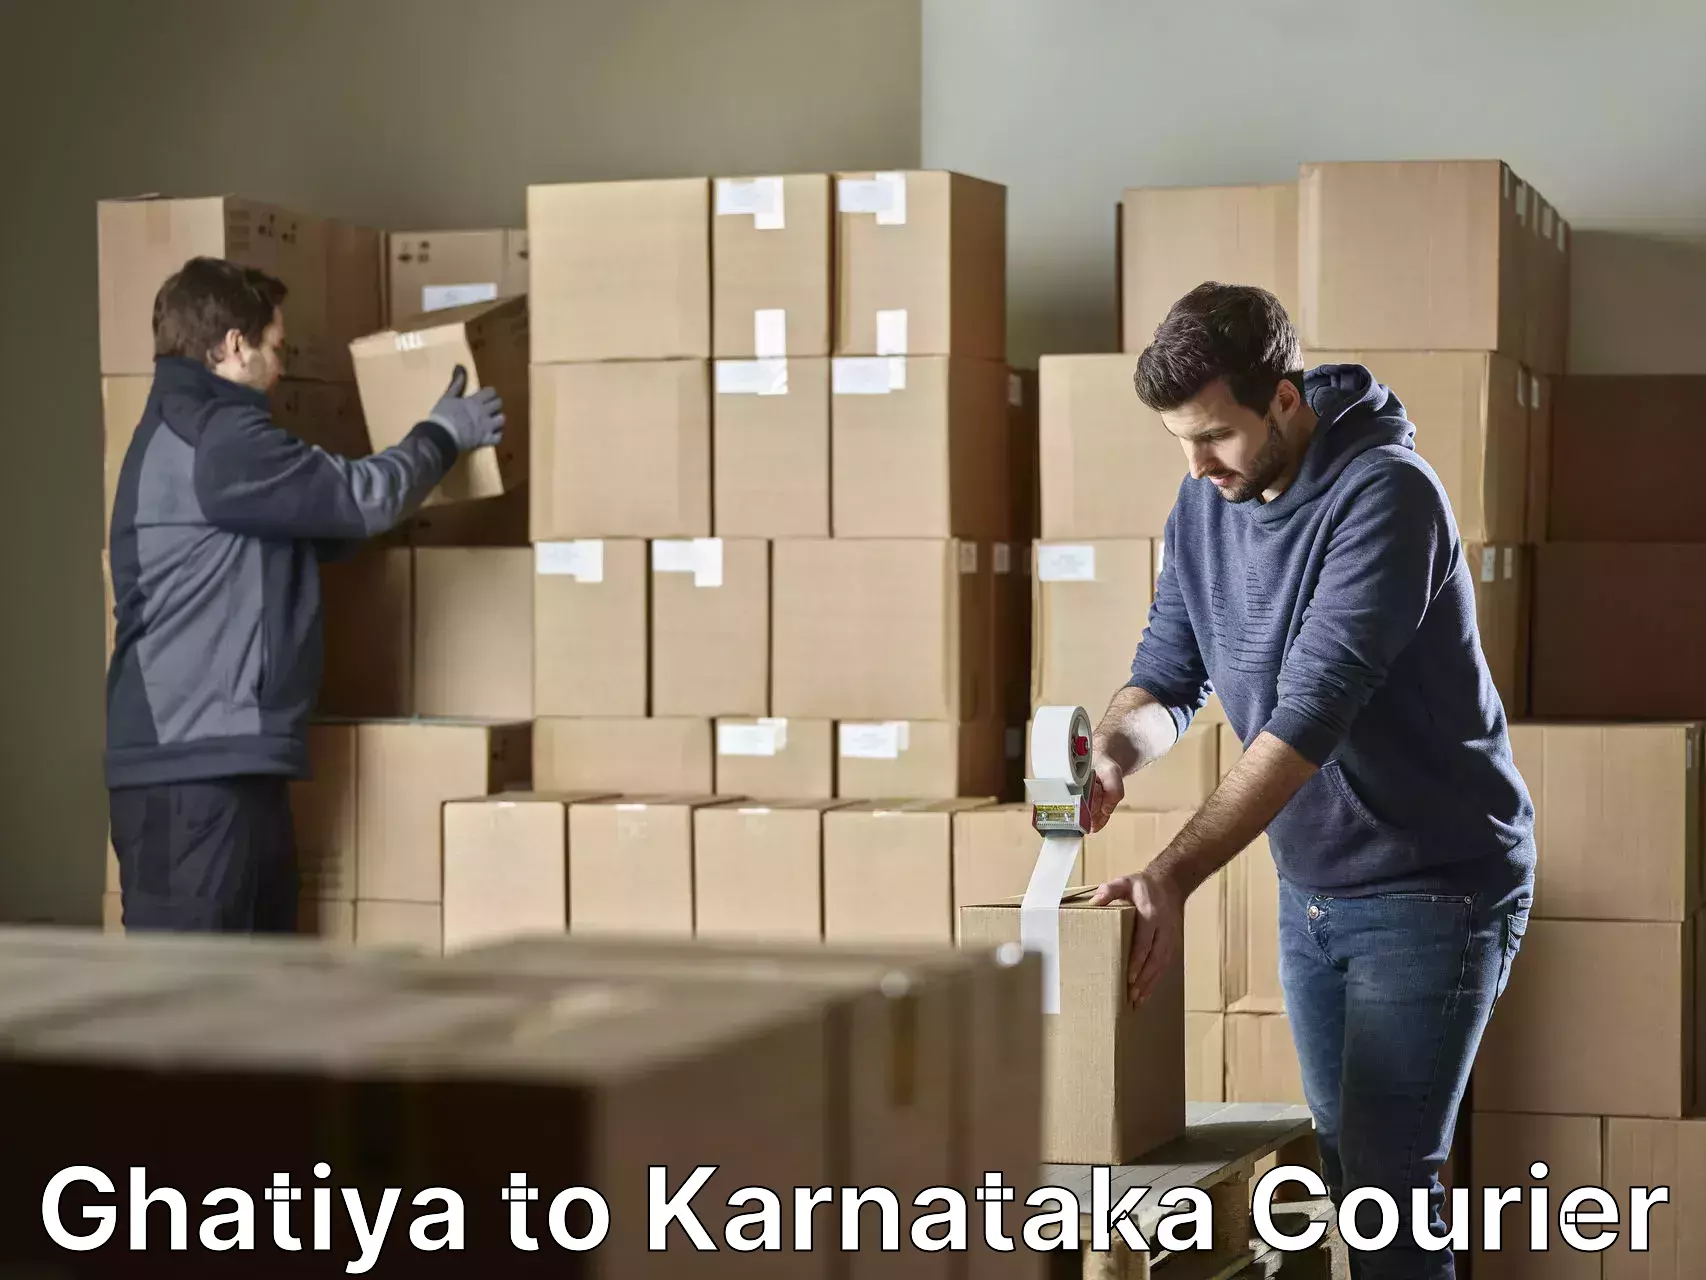 Furniture relocation experts Ghatiya to Manipal Academy of Higher Education